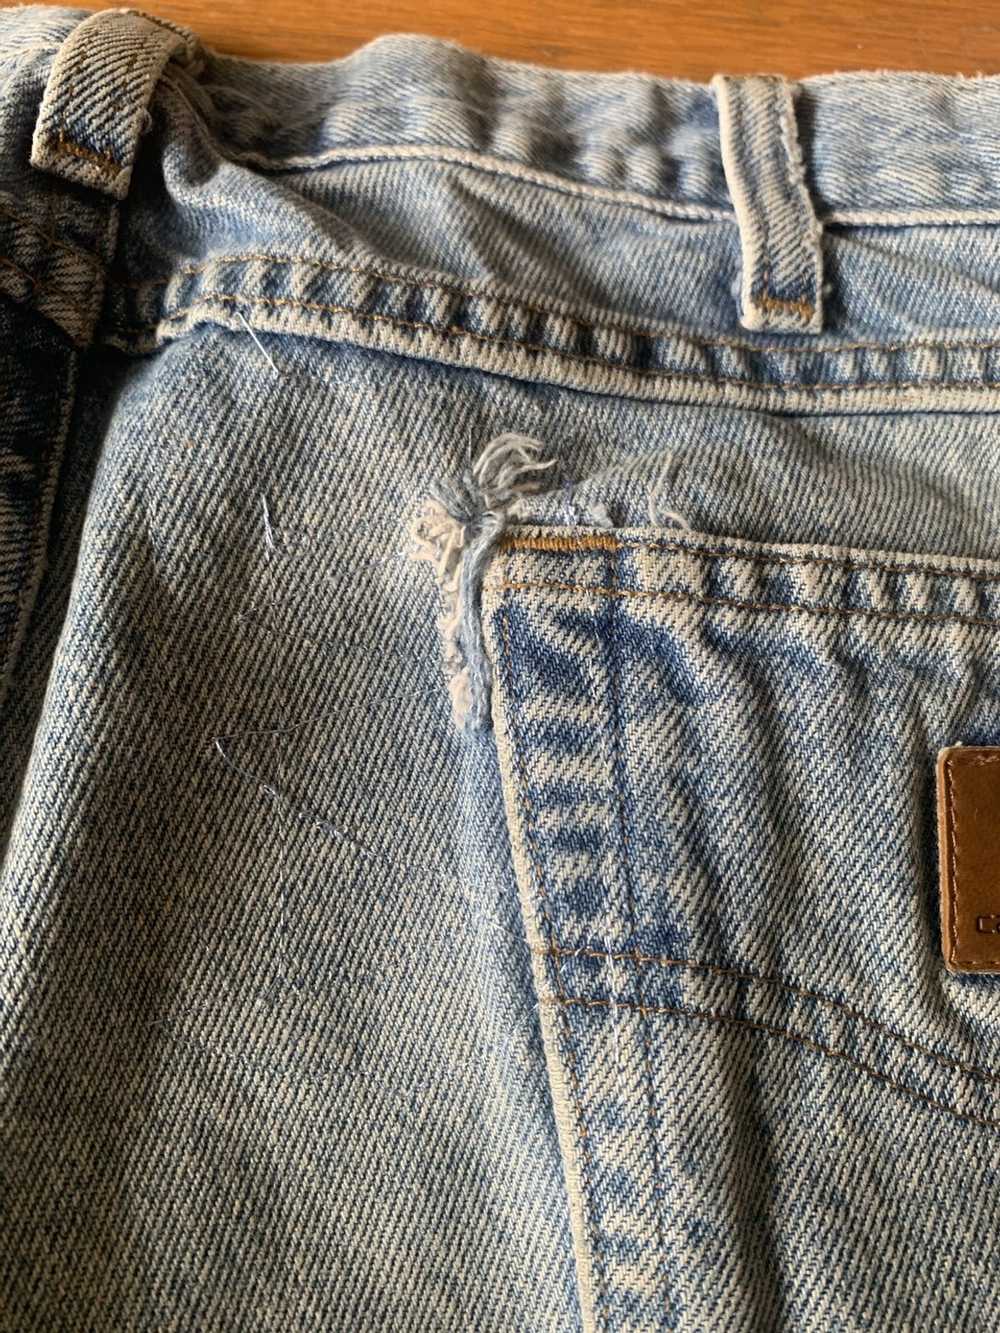 Carhartt Carhartt Patched Repaired Denim Blue Jea… - image 6